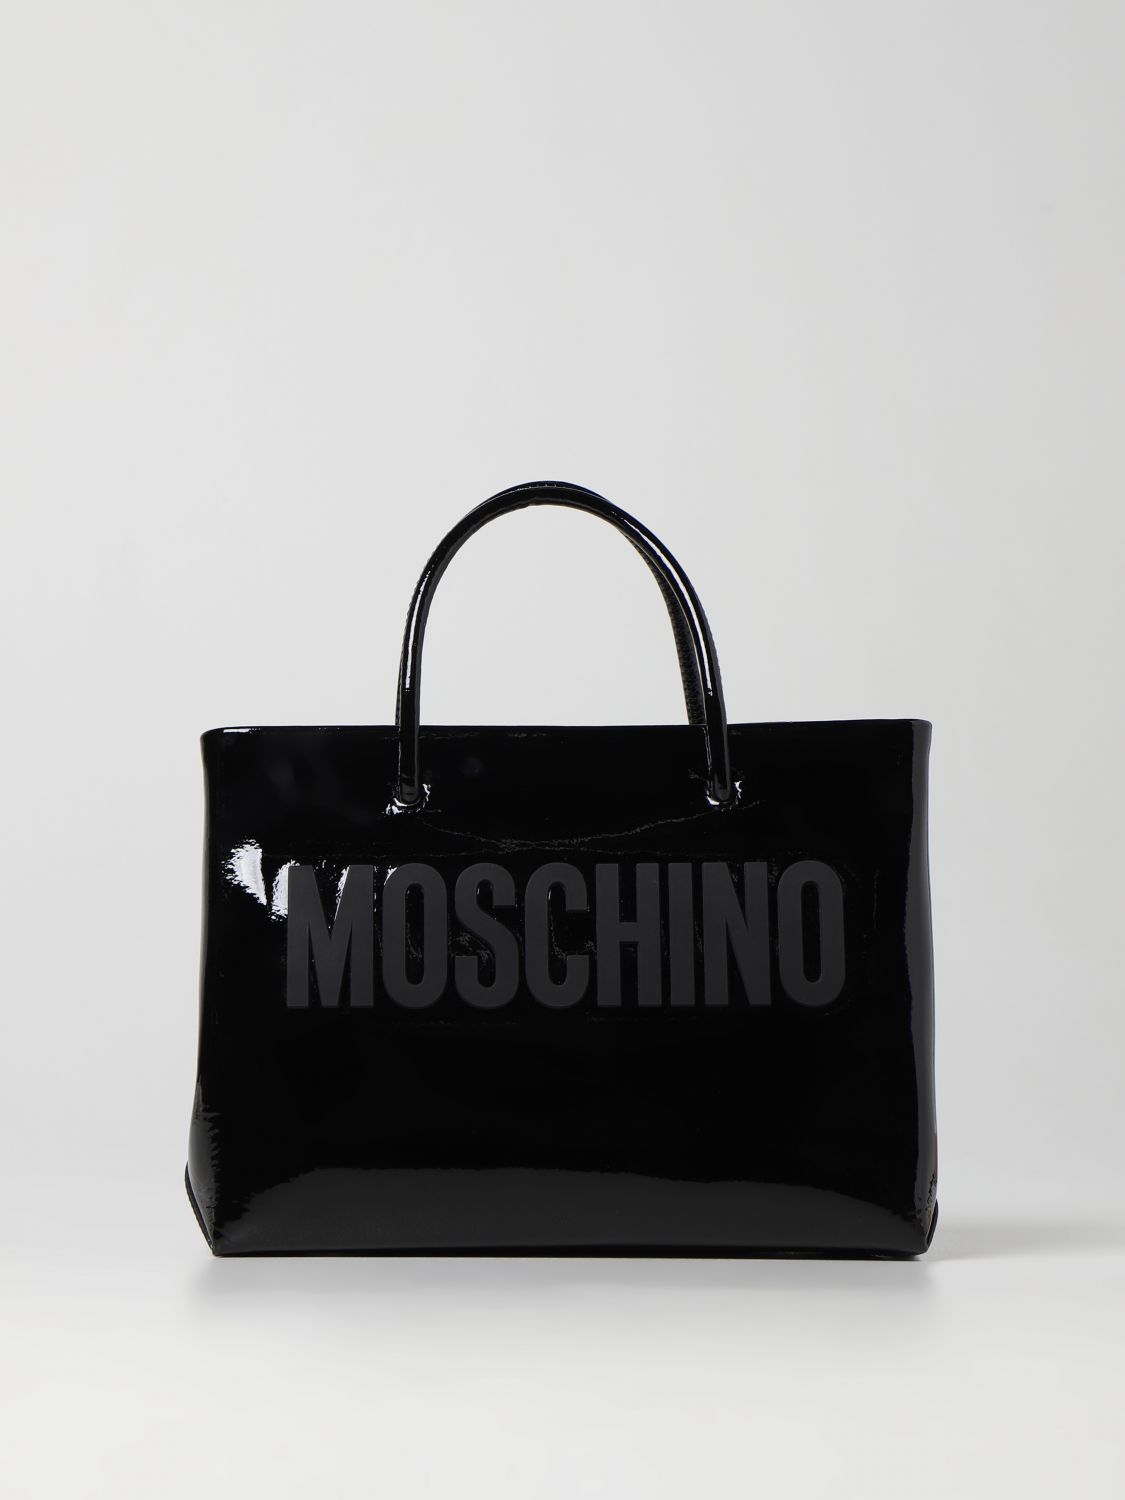 MOSCHINO COUTURE: patent leather tote bag - Black | Moschino Couture ...